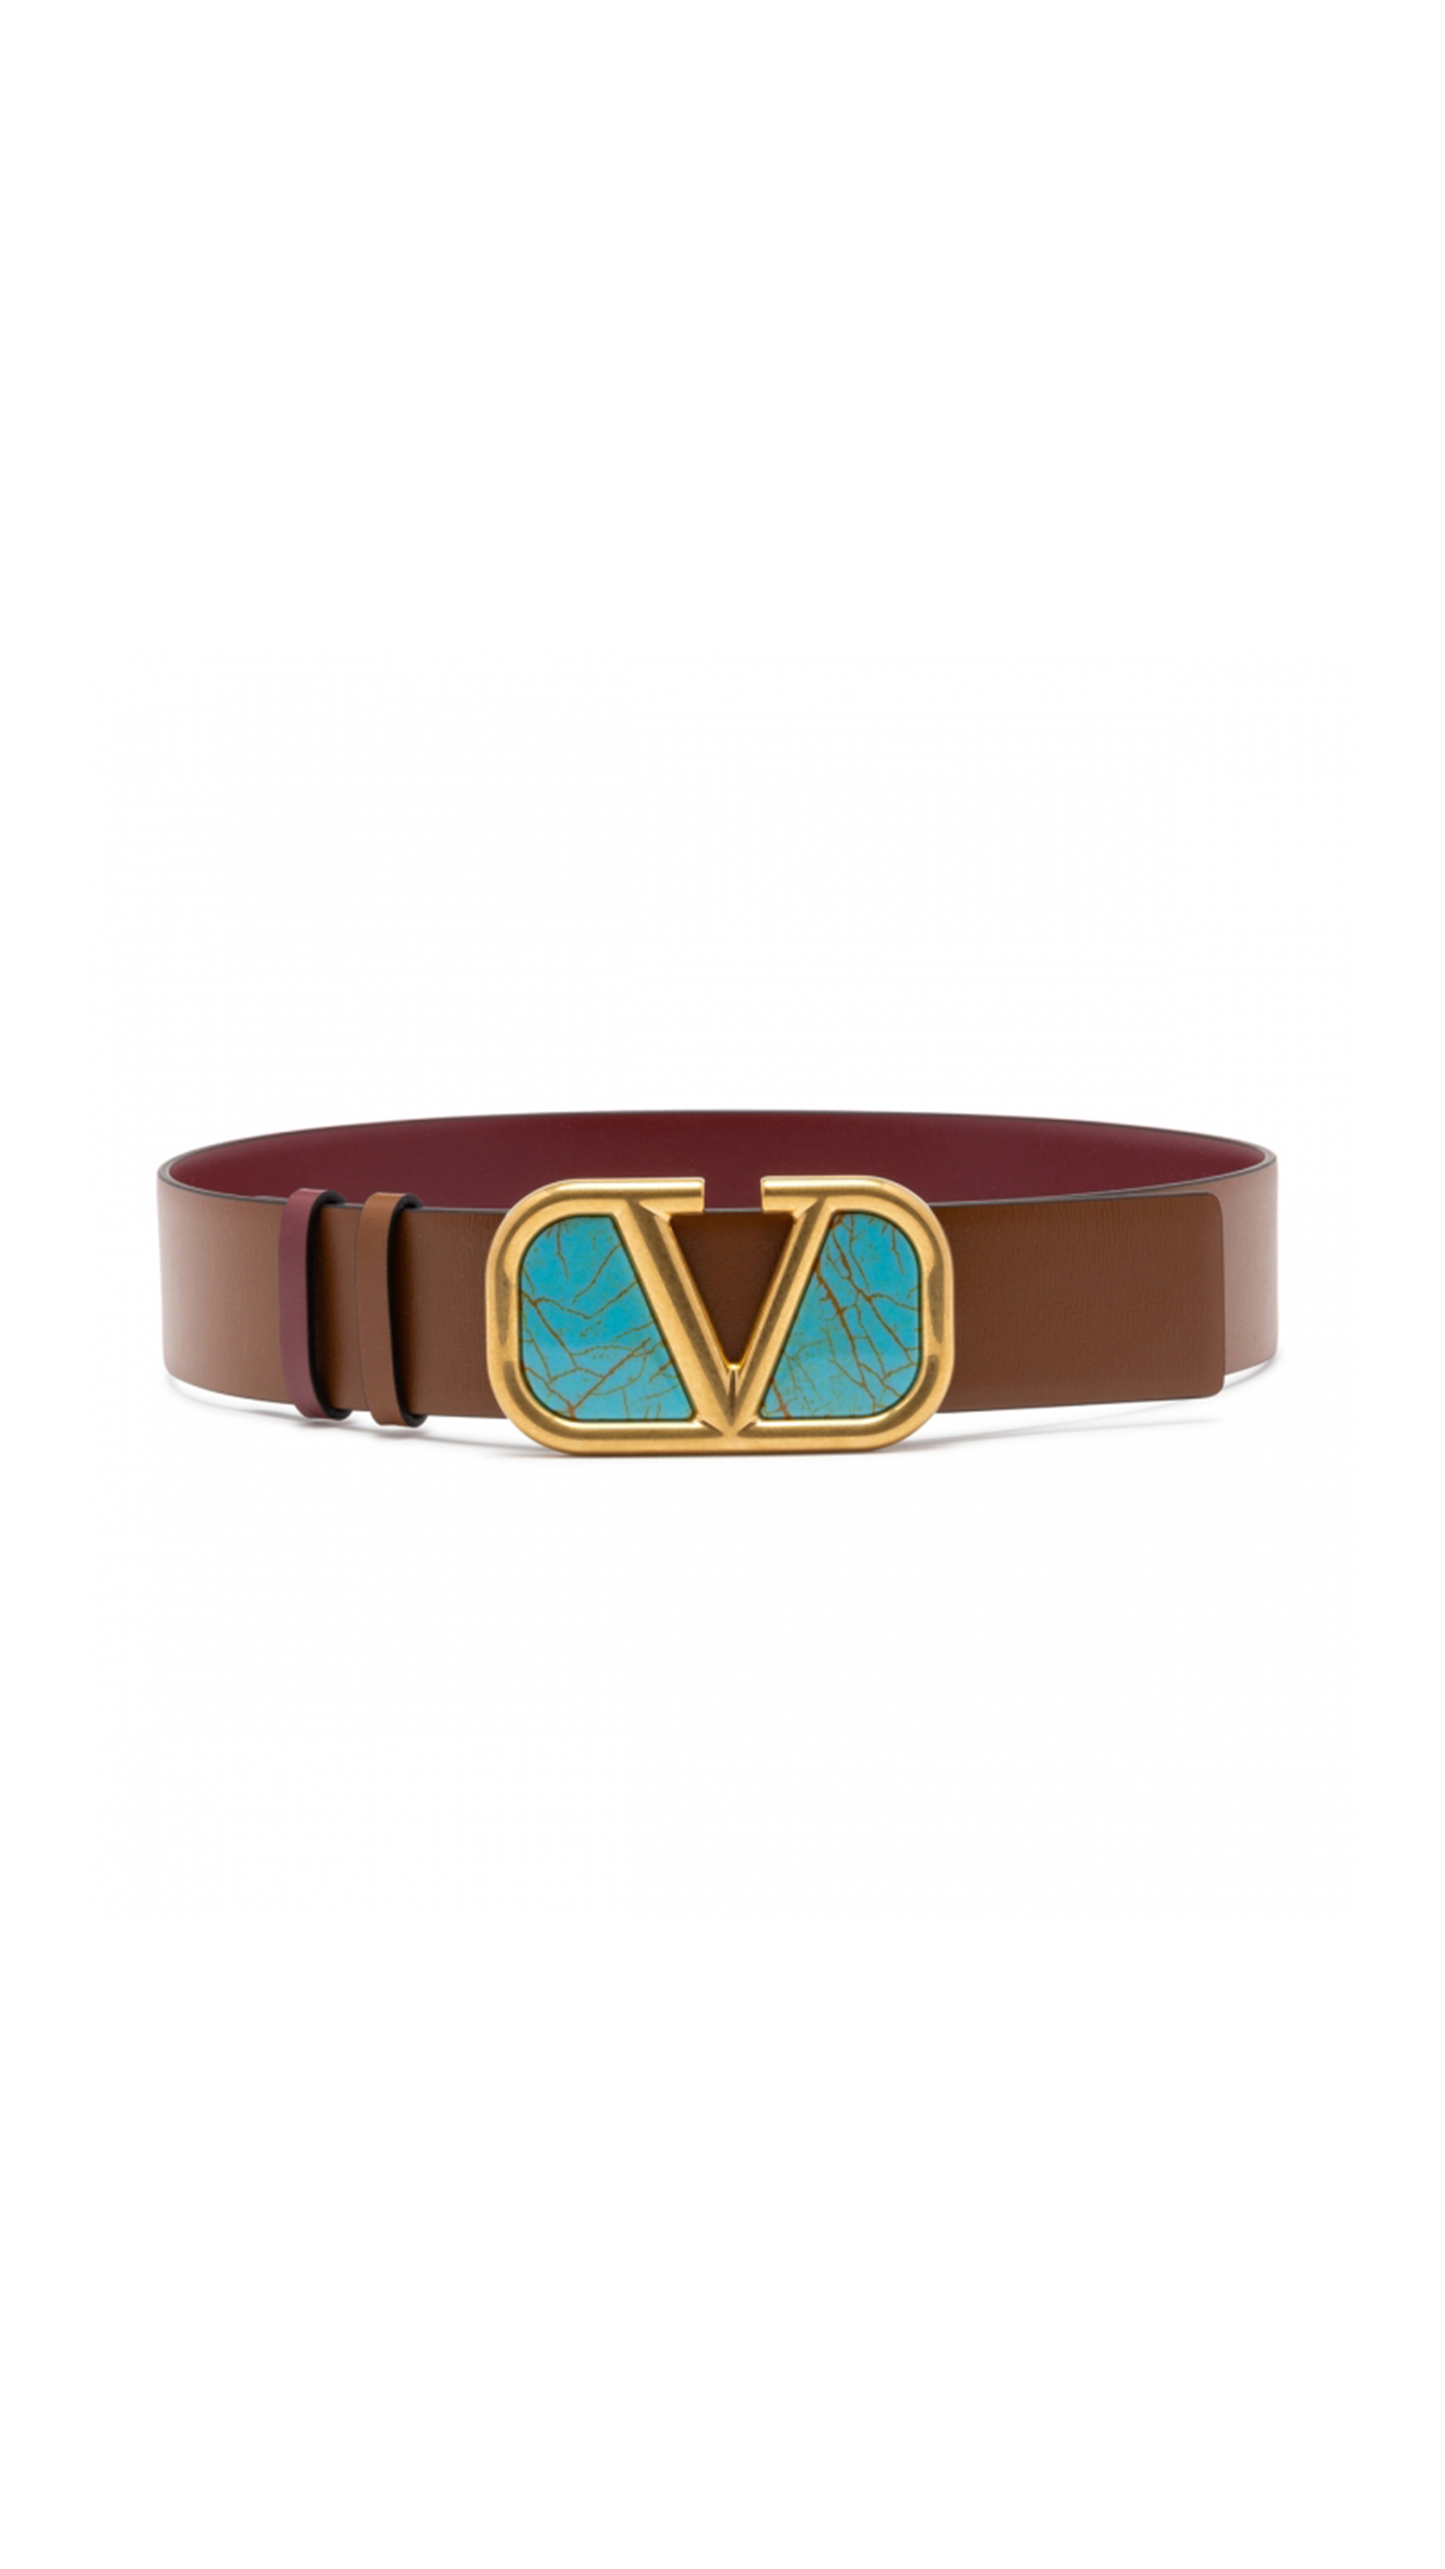 VLogo Belt With Inserts - Brown / Blue